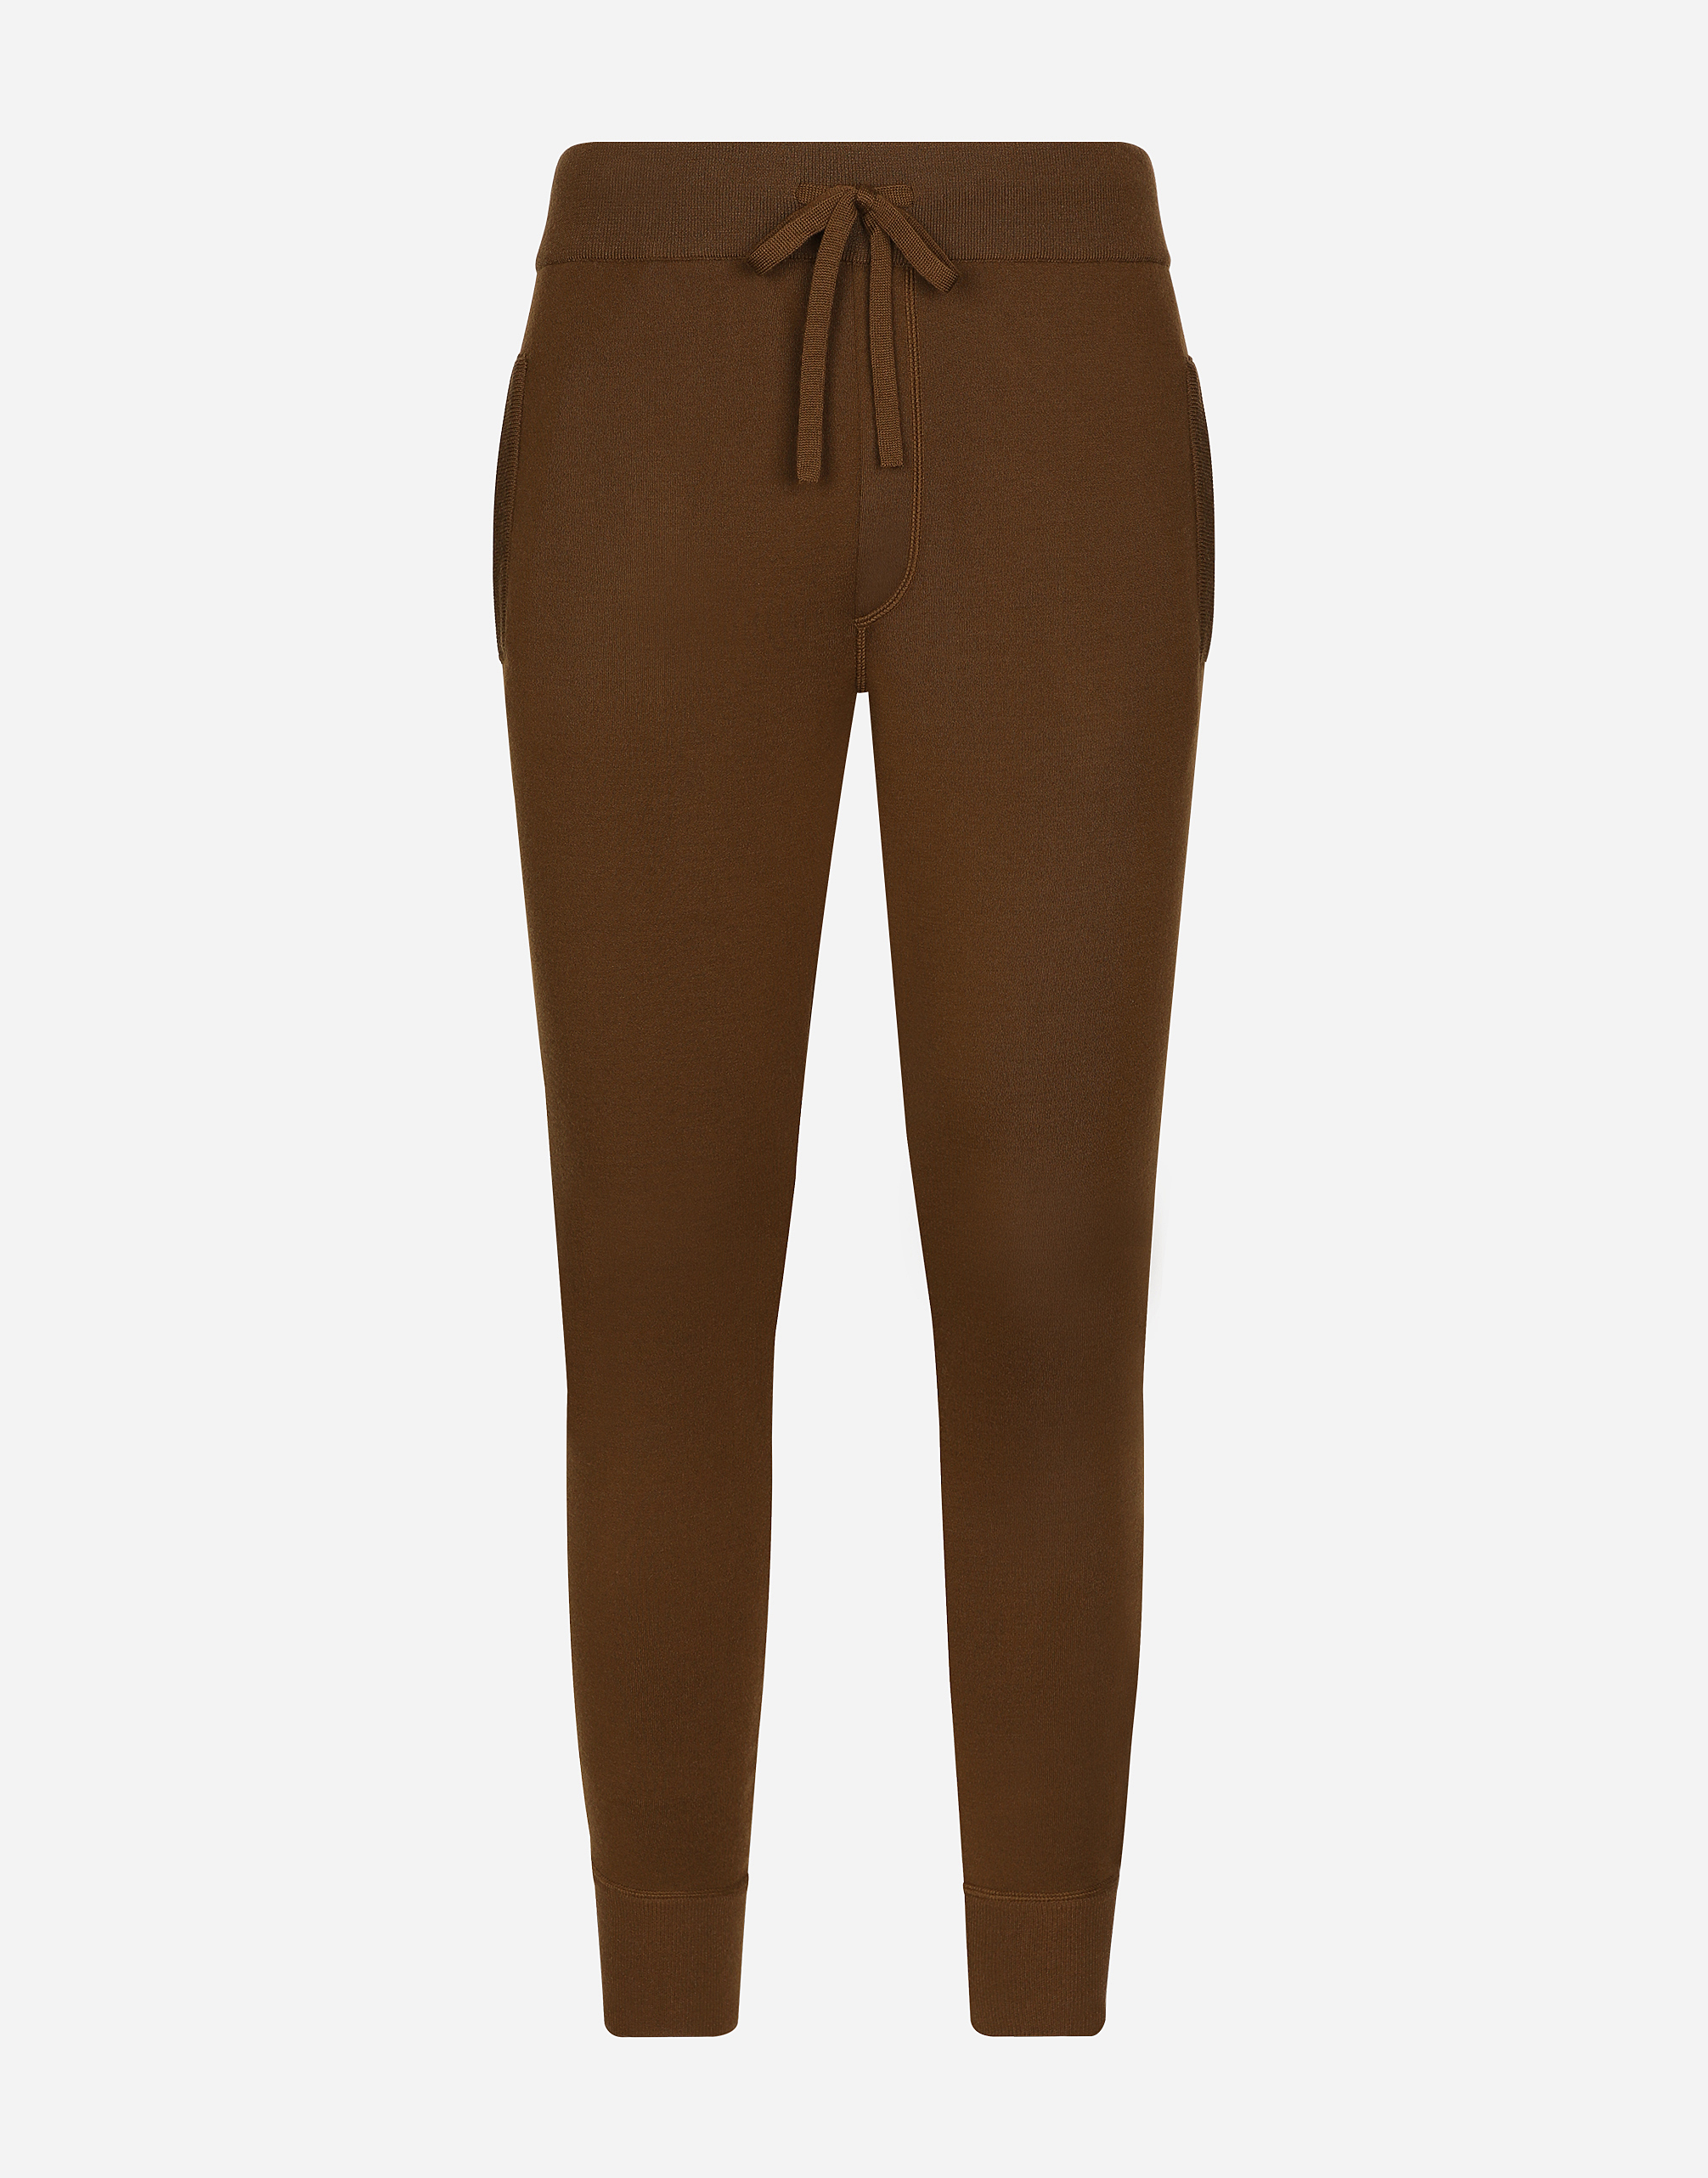 Wool and cashmere knit jogging pants in Brown